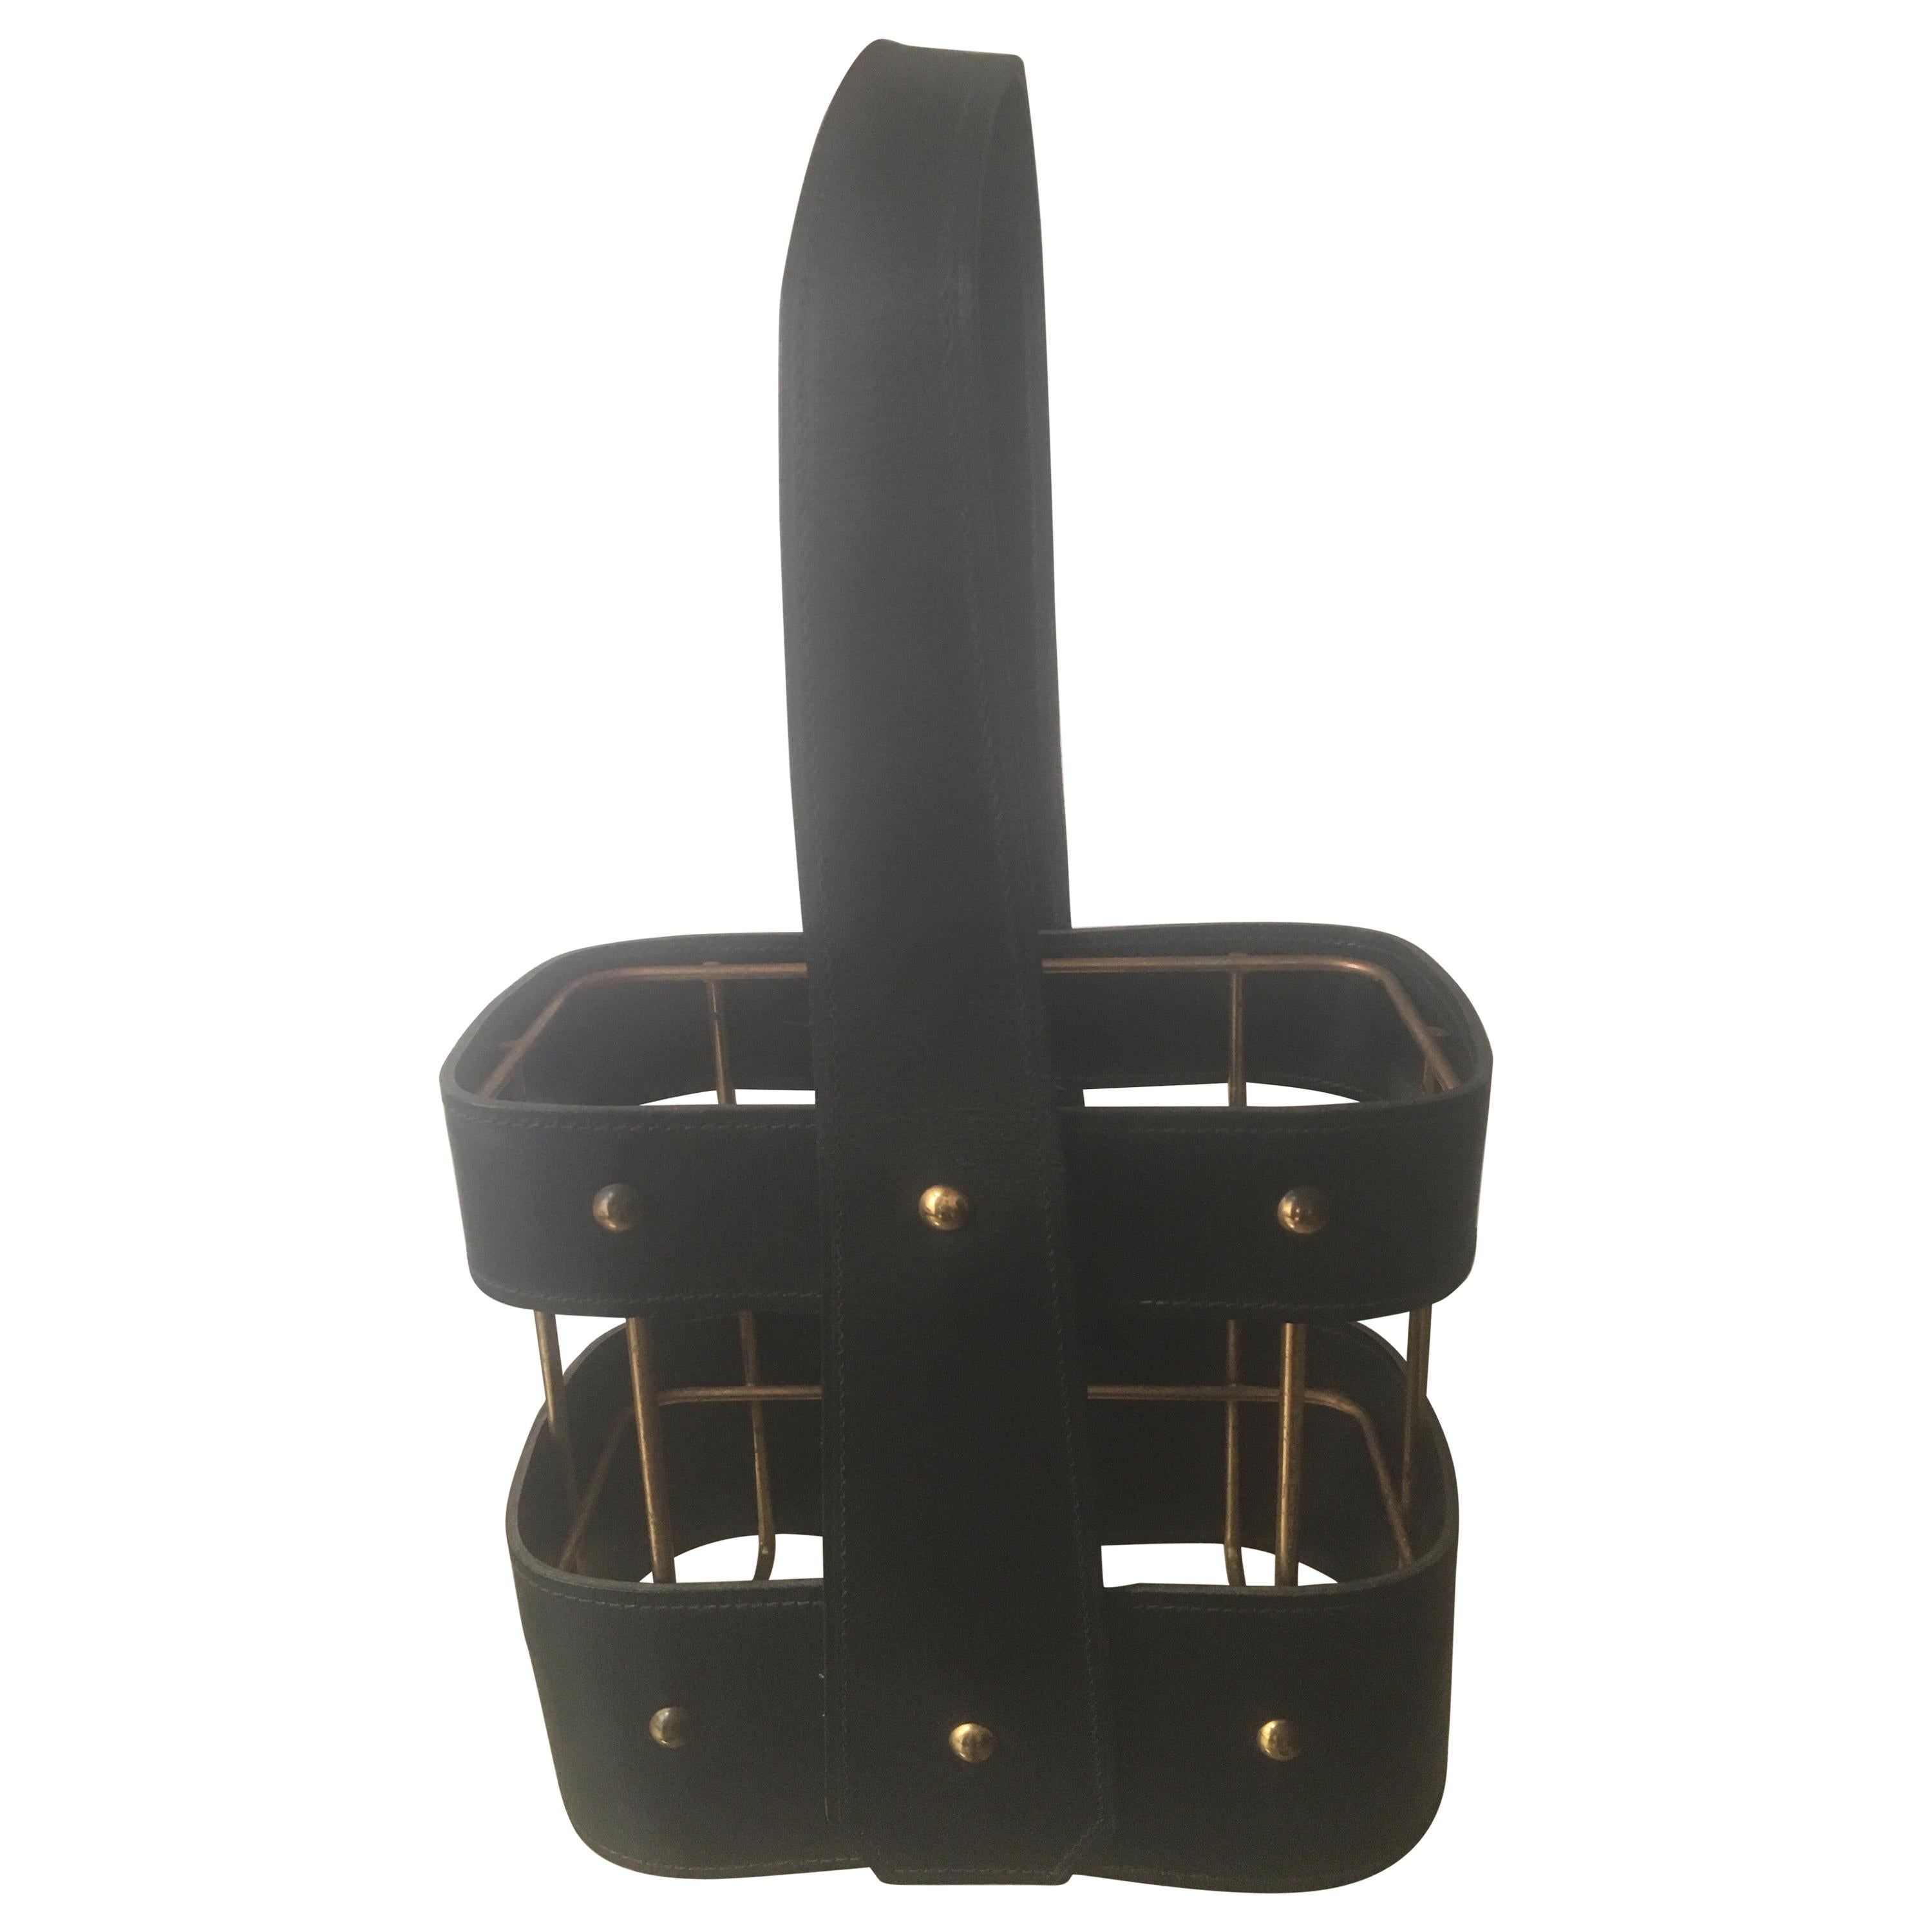 Jacques Adnet Black Leather and Brass Bottle Holder, French, 1950s For Sale